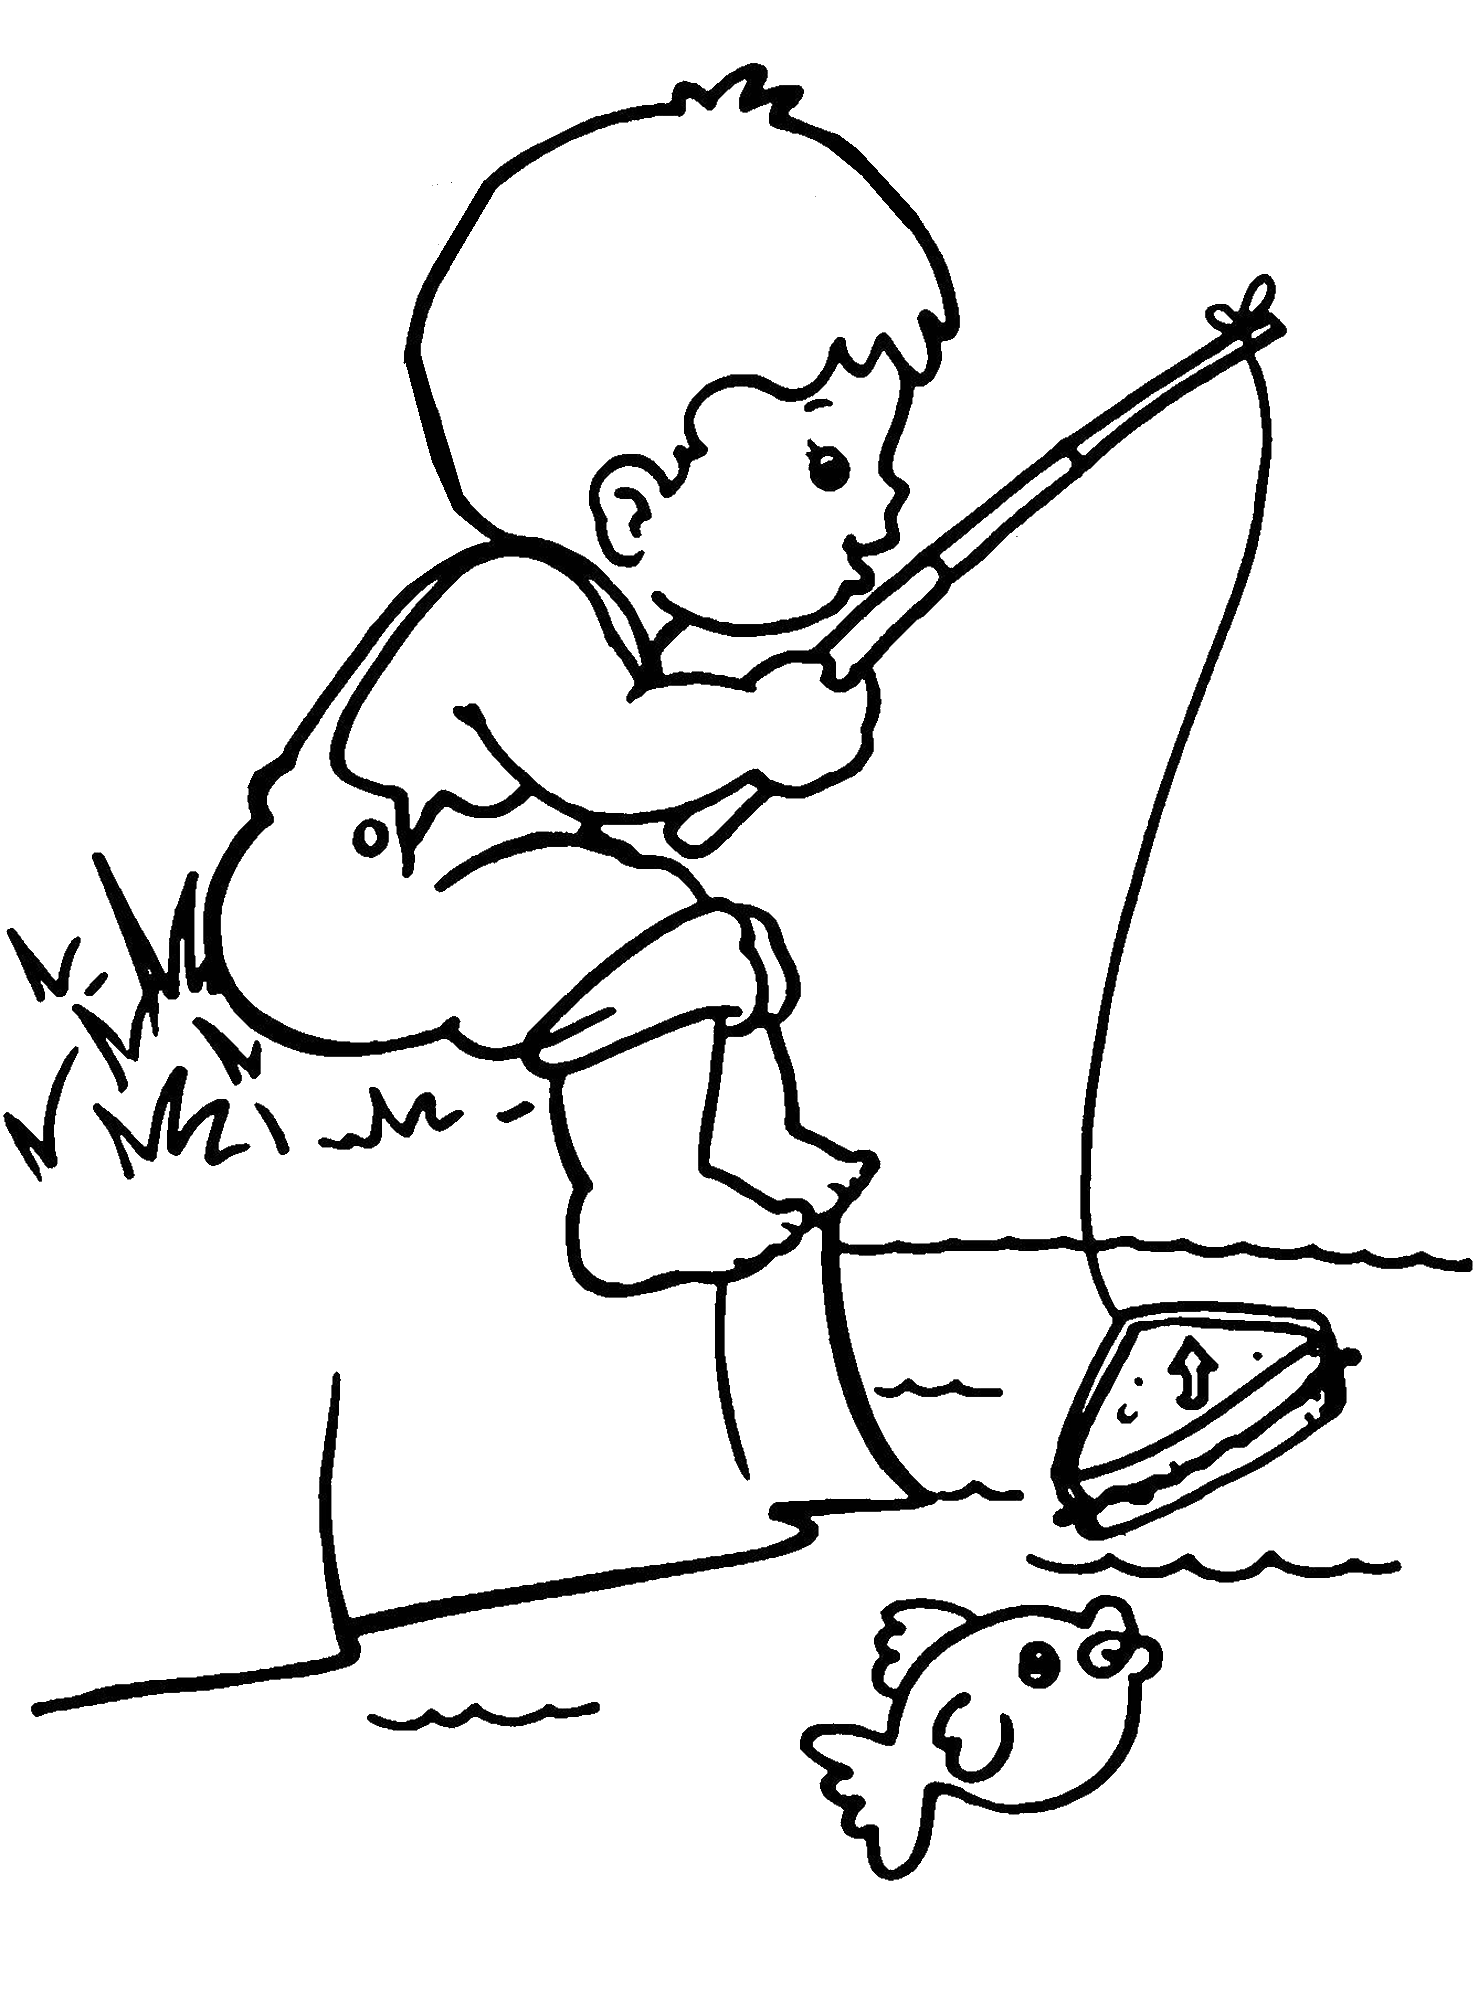 Boy fishing clipart black and white 